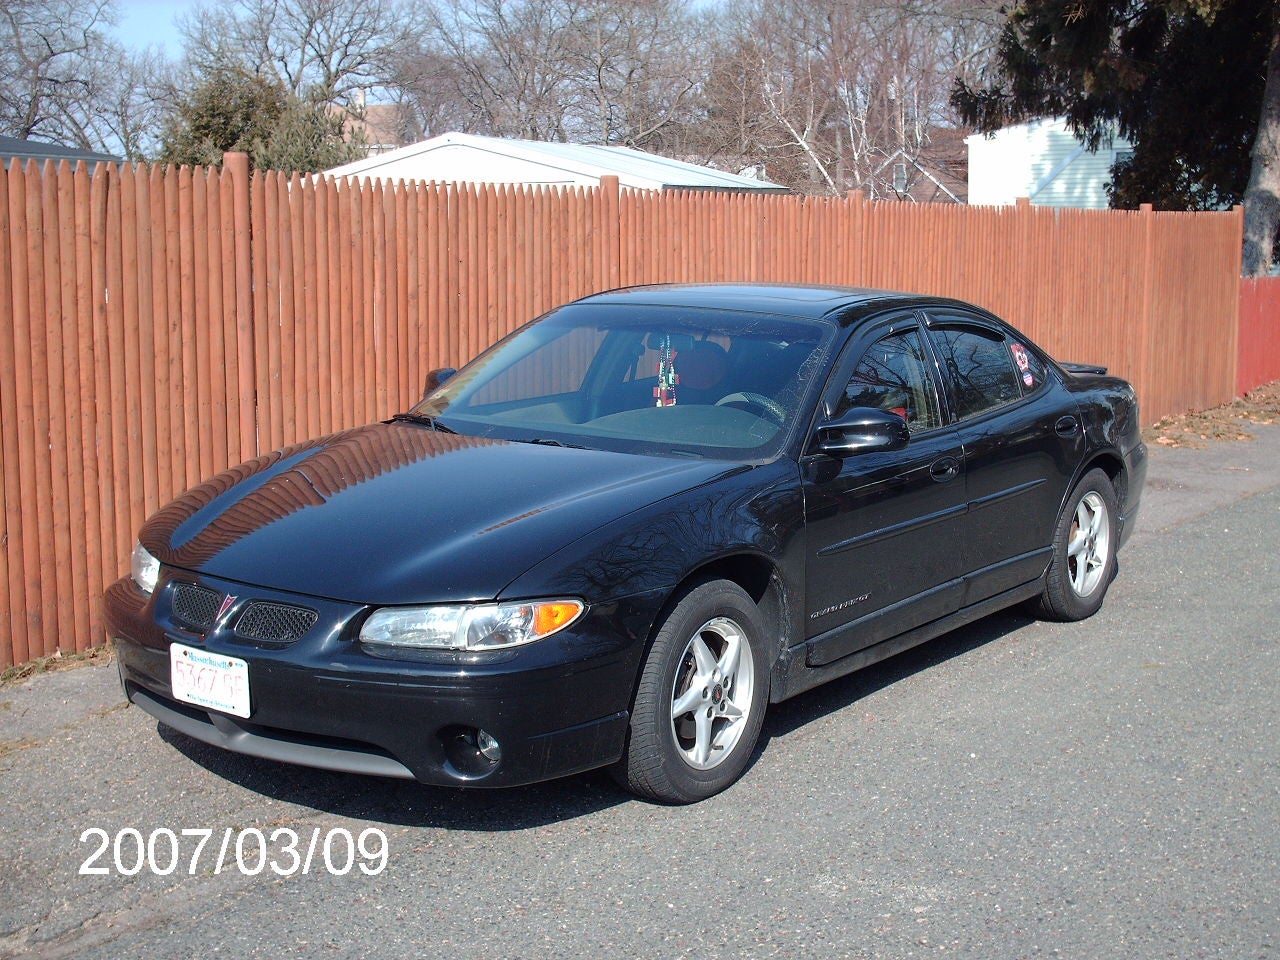 2003 Pontiac Grand Prix GTP related infomation,specifications - WeiLi